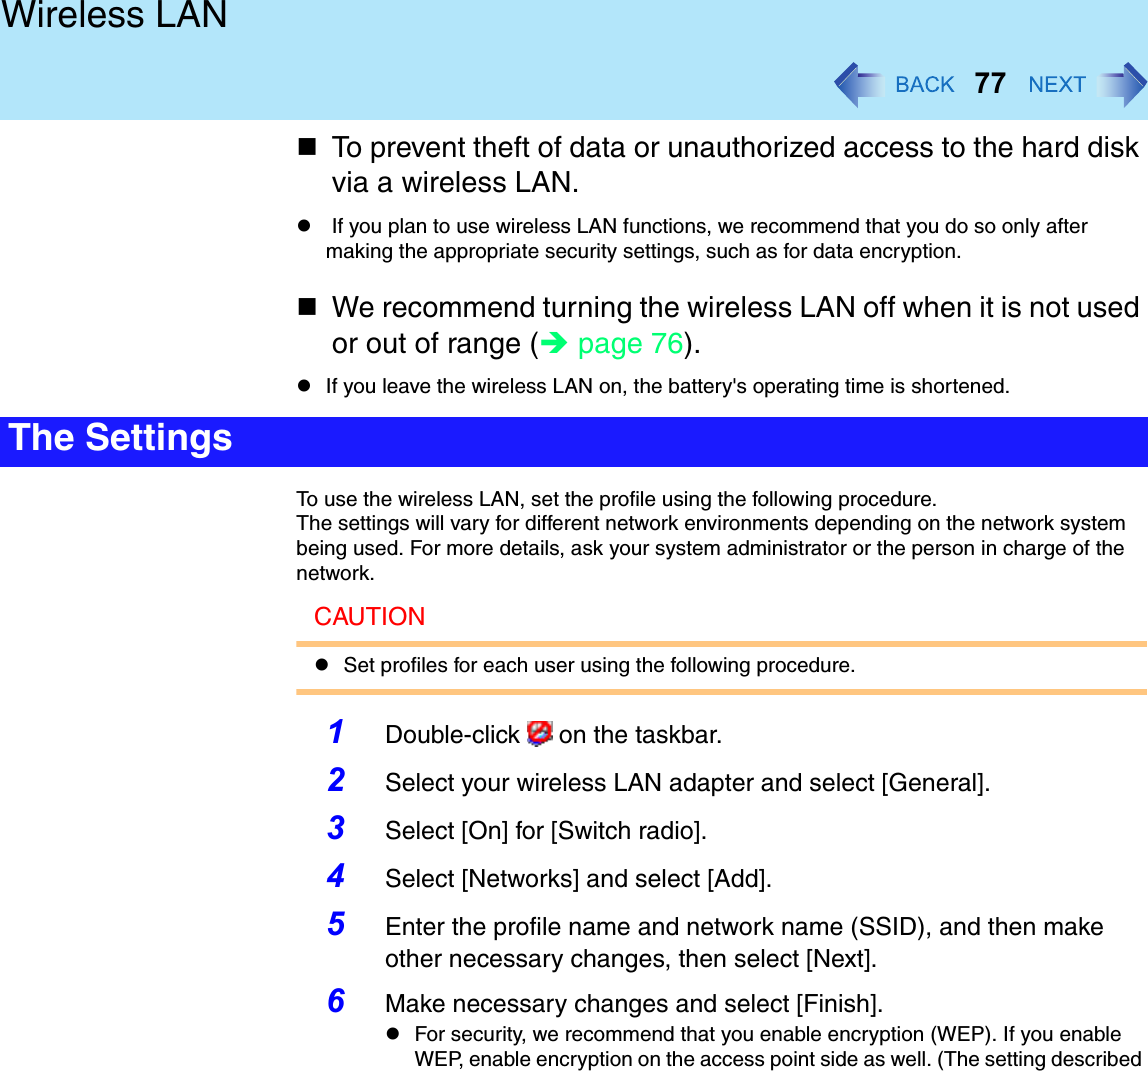 77Wireless LANTo prevent theft of data or unauthorized access to the hard disk via a wireless LAN. If you plan to use wireless LAN functions, we recommend that you do so only after making the appropriate security settings, such as for data encryption.We recommend turning the wireless LAN off when it is not used or out of range (page 76).If you leave the wireless LAN on, the battery&apos;s operating time is shortened.To use the wireless LAN, set the profile using the following procedure.The settings will vary for different network environments depending on the network system being used. For more details, ask your system administrator or the person in charge of the network.CAUTIONSet profiles for each user using the following procedure.1Double-click   on the taskbar.2Select your wireless LAN adapter and select [General].3Select [On] for [Switch radio].4Select [Networks] and select [Add].5Enter the profile name and network name (SSID), and then make other necessary changes, then select [Next].6Make necessary changes and select [Finish]. For security, we recommend that you enable encryption (WEP). If you enable WEP, enable encryption on the access point side as well. (The setting described The Settings